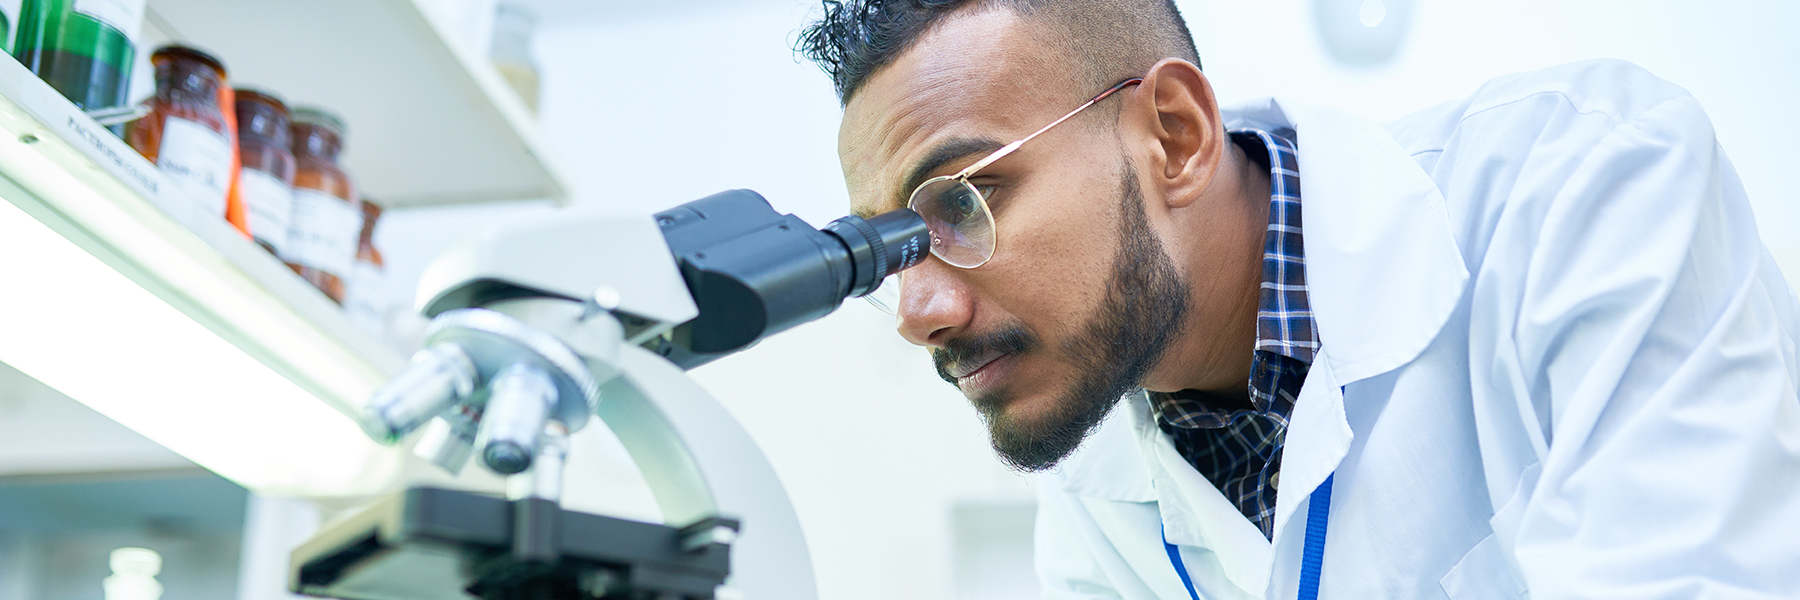 Male scientist in lab looking through microscope 